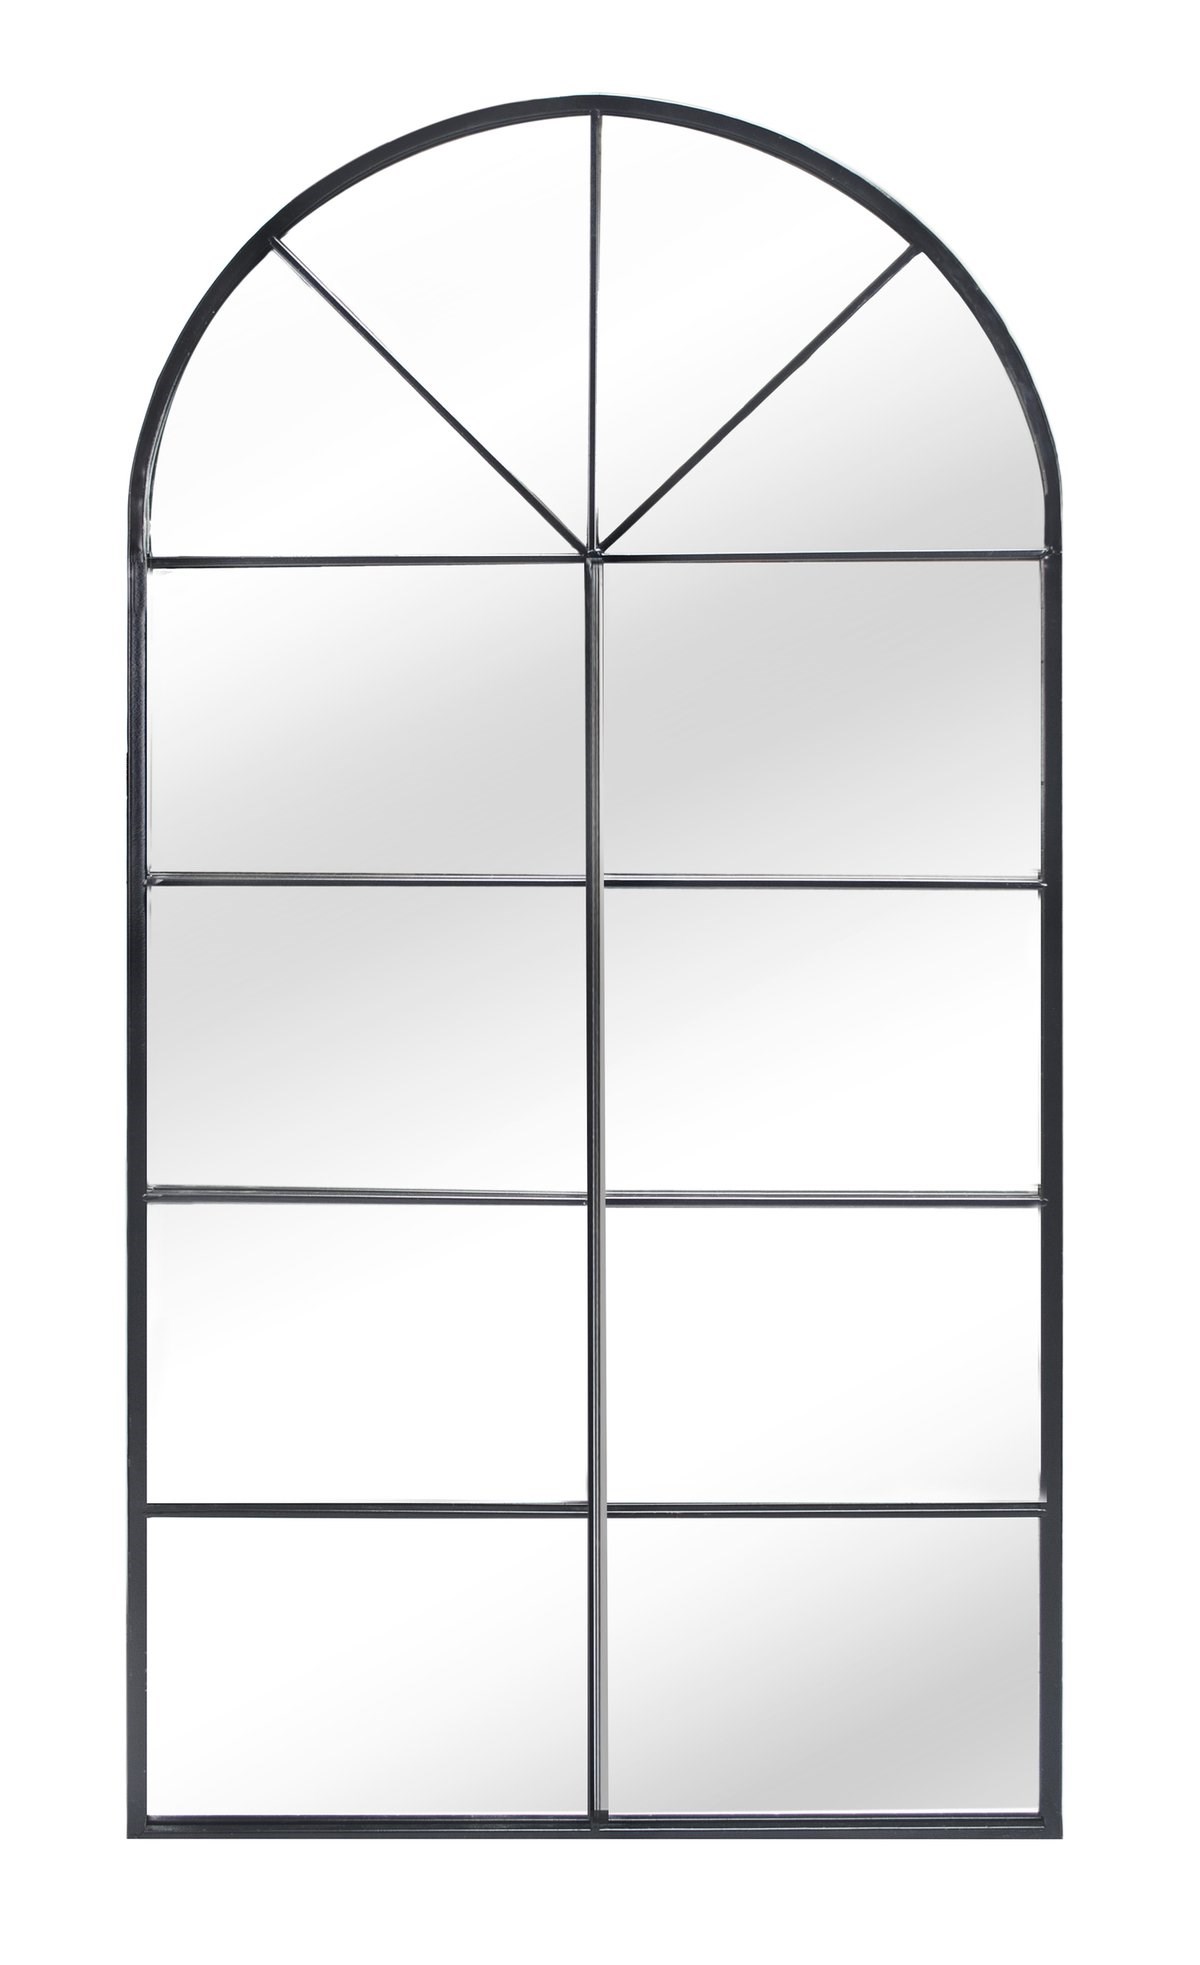 4ft 5in x 2ft 3in Metal Arch Glass Garden Mirror - by Reflect™